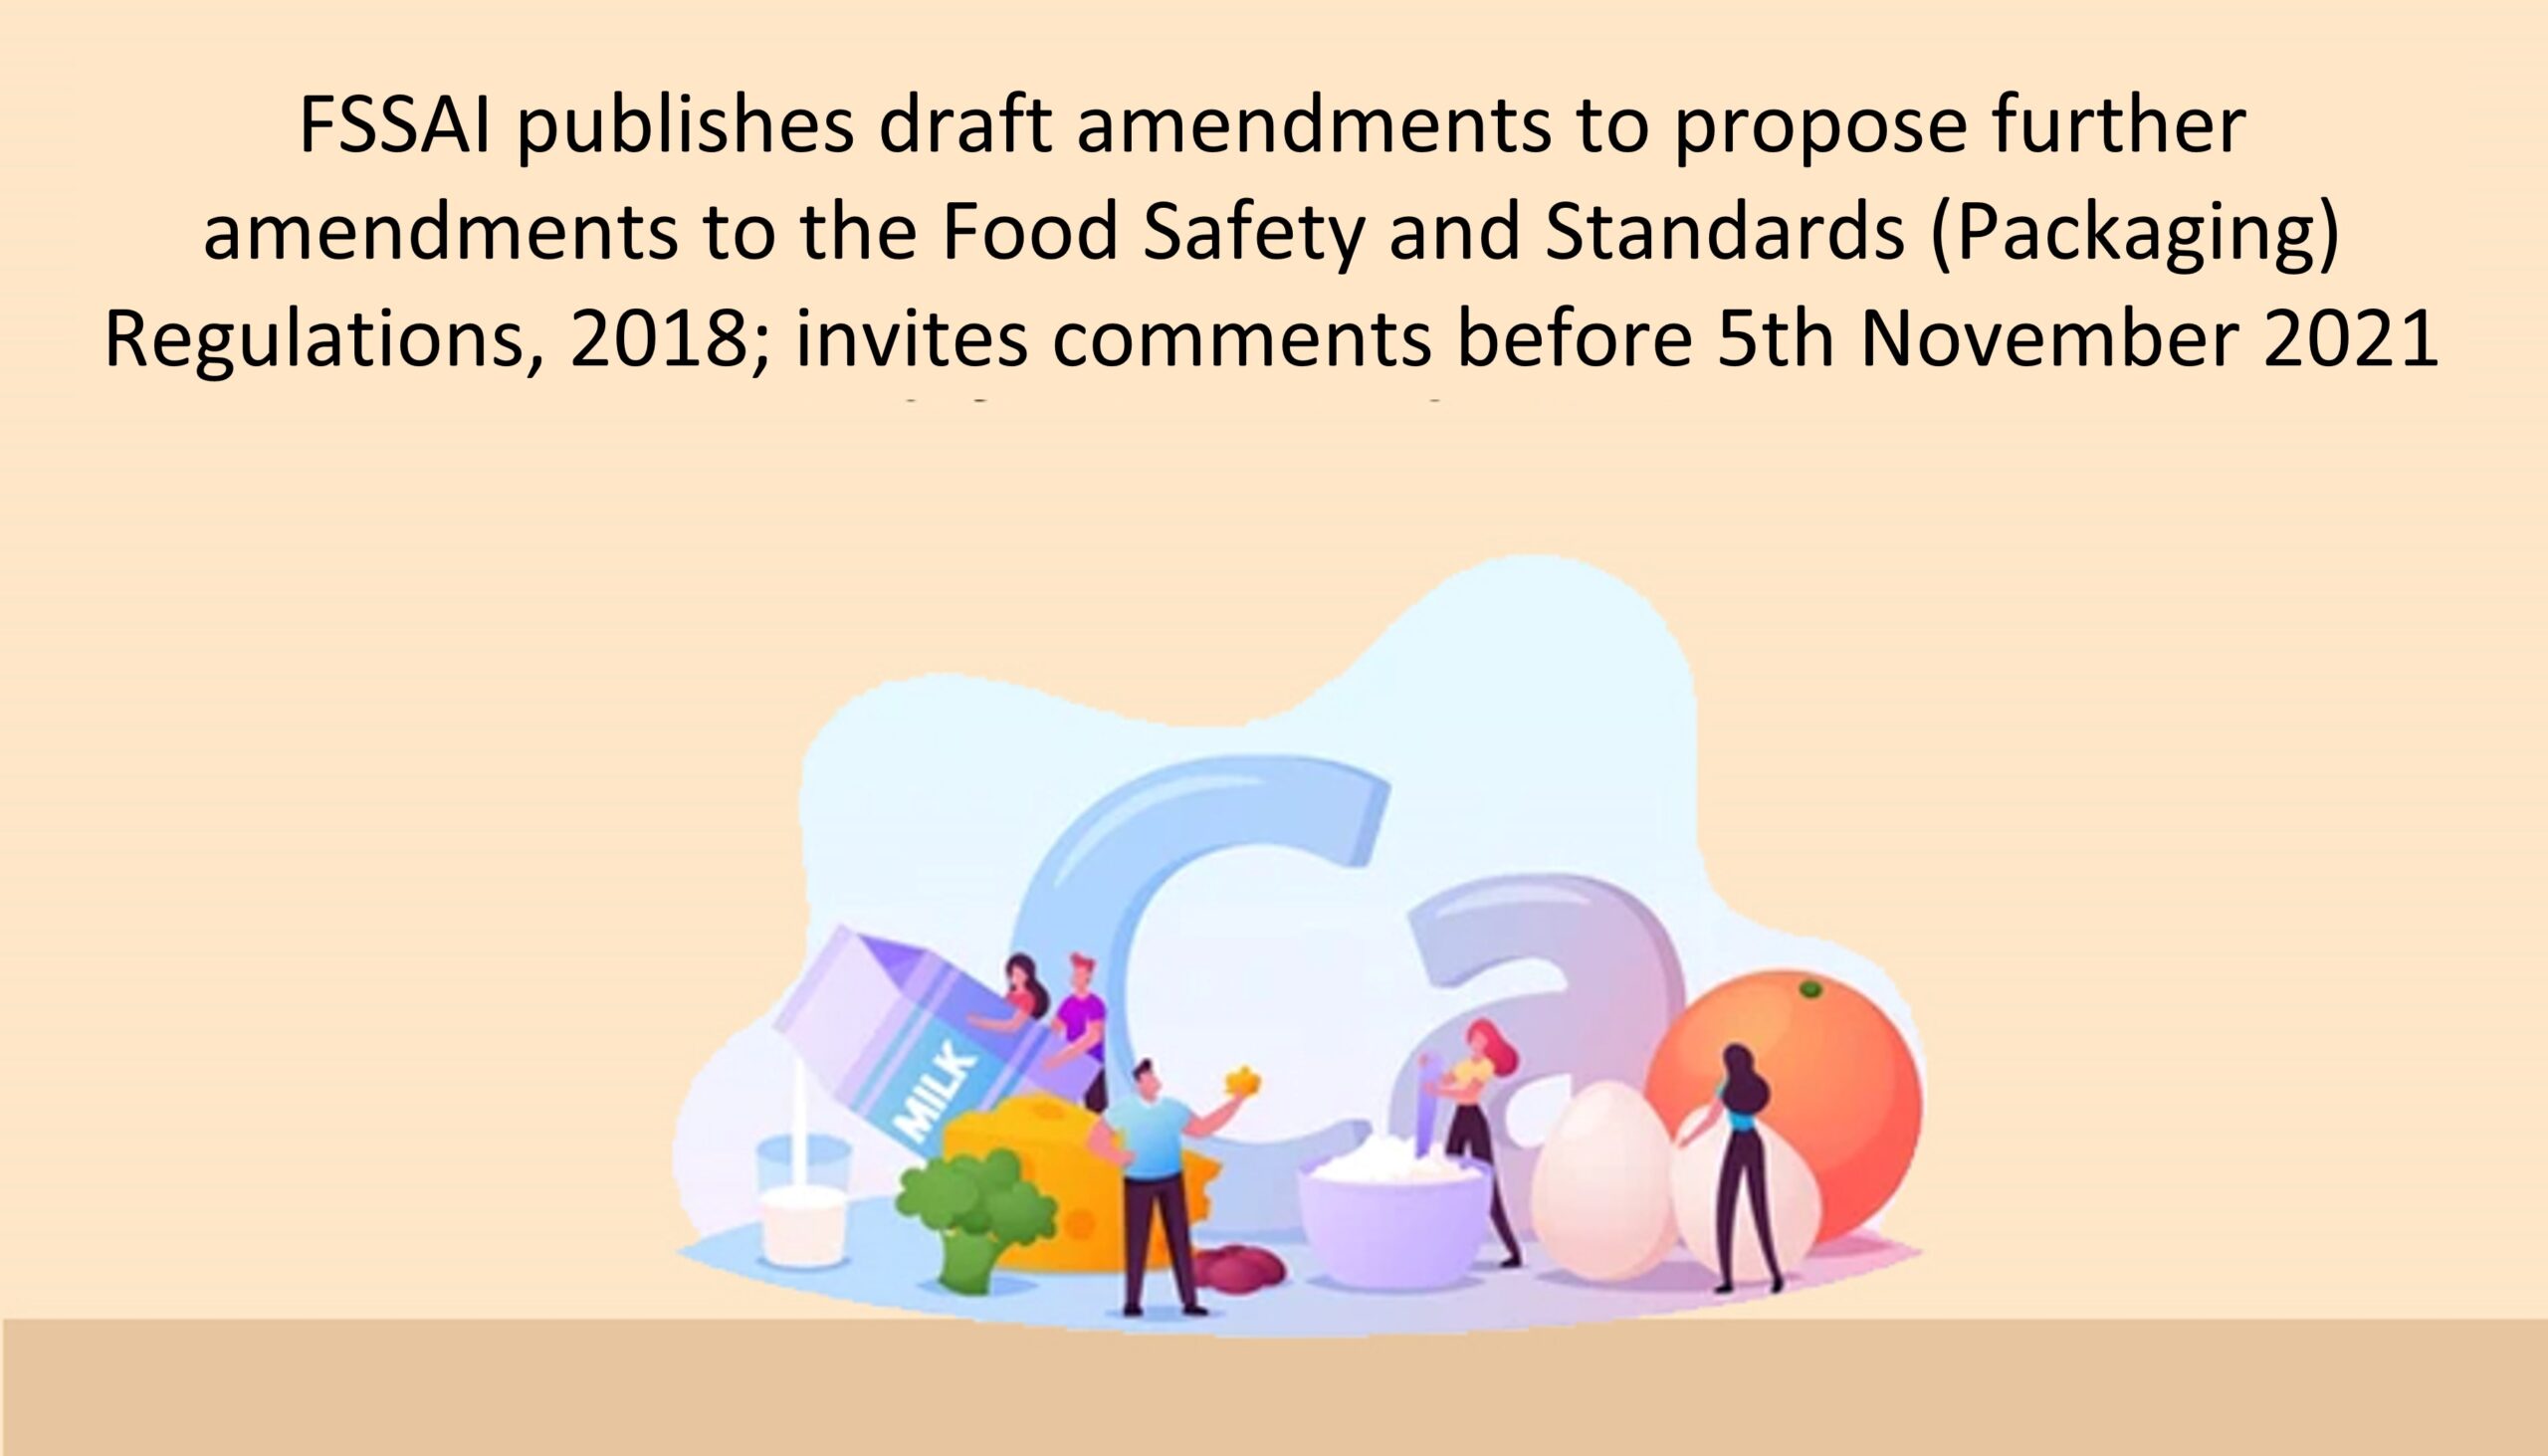 FSSAI publishes draft amendments to propose further amendments to the Food Safety and Standards (Packaging) Regulations, 2018; invites comments before 5th November, 2021